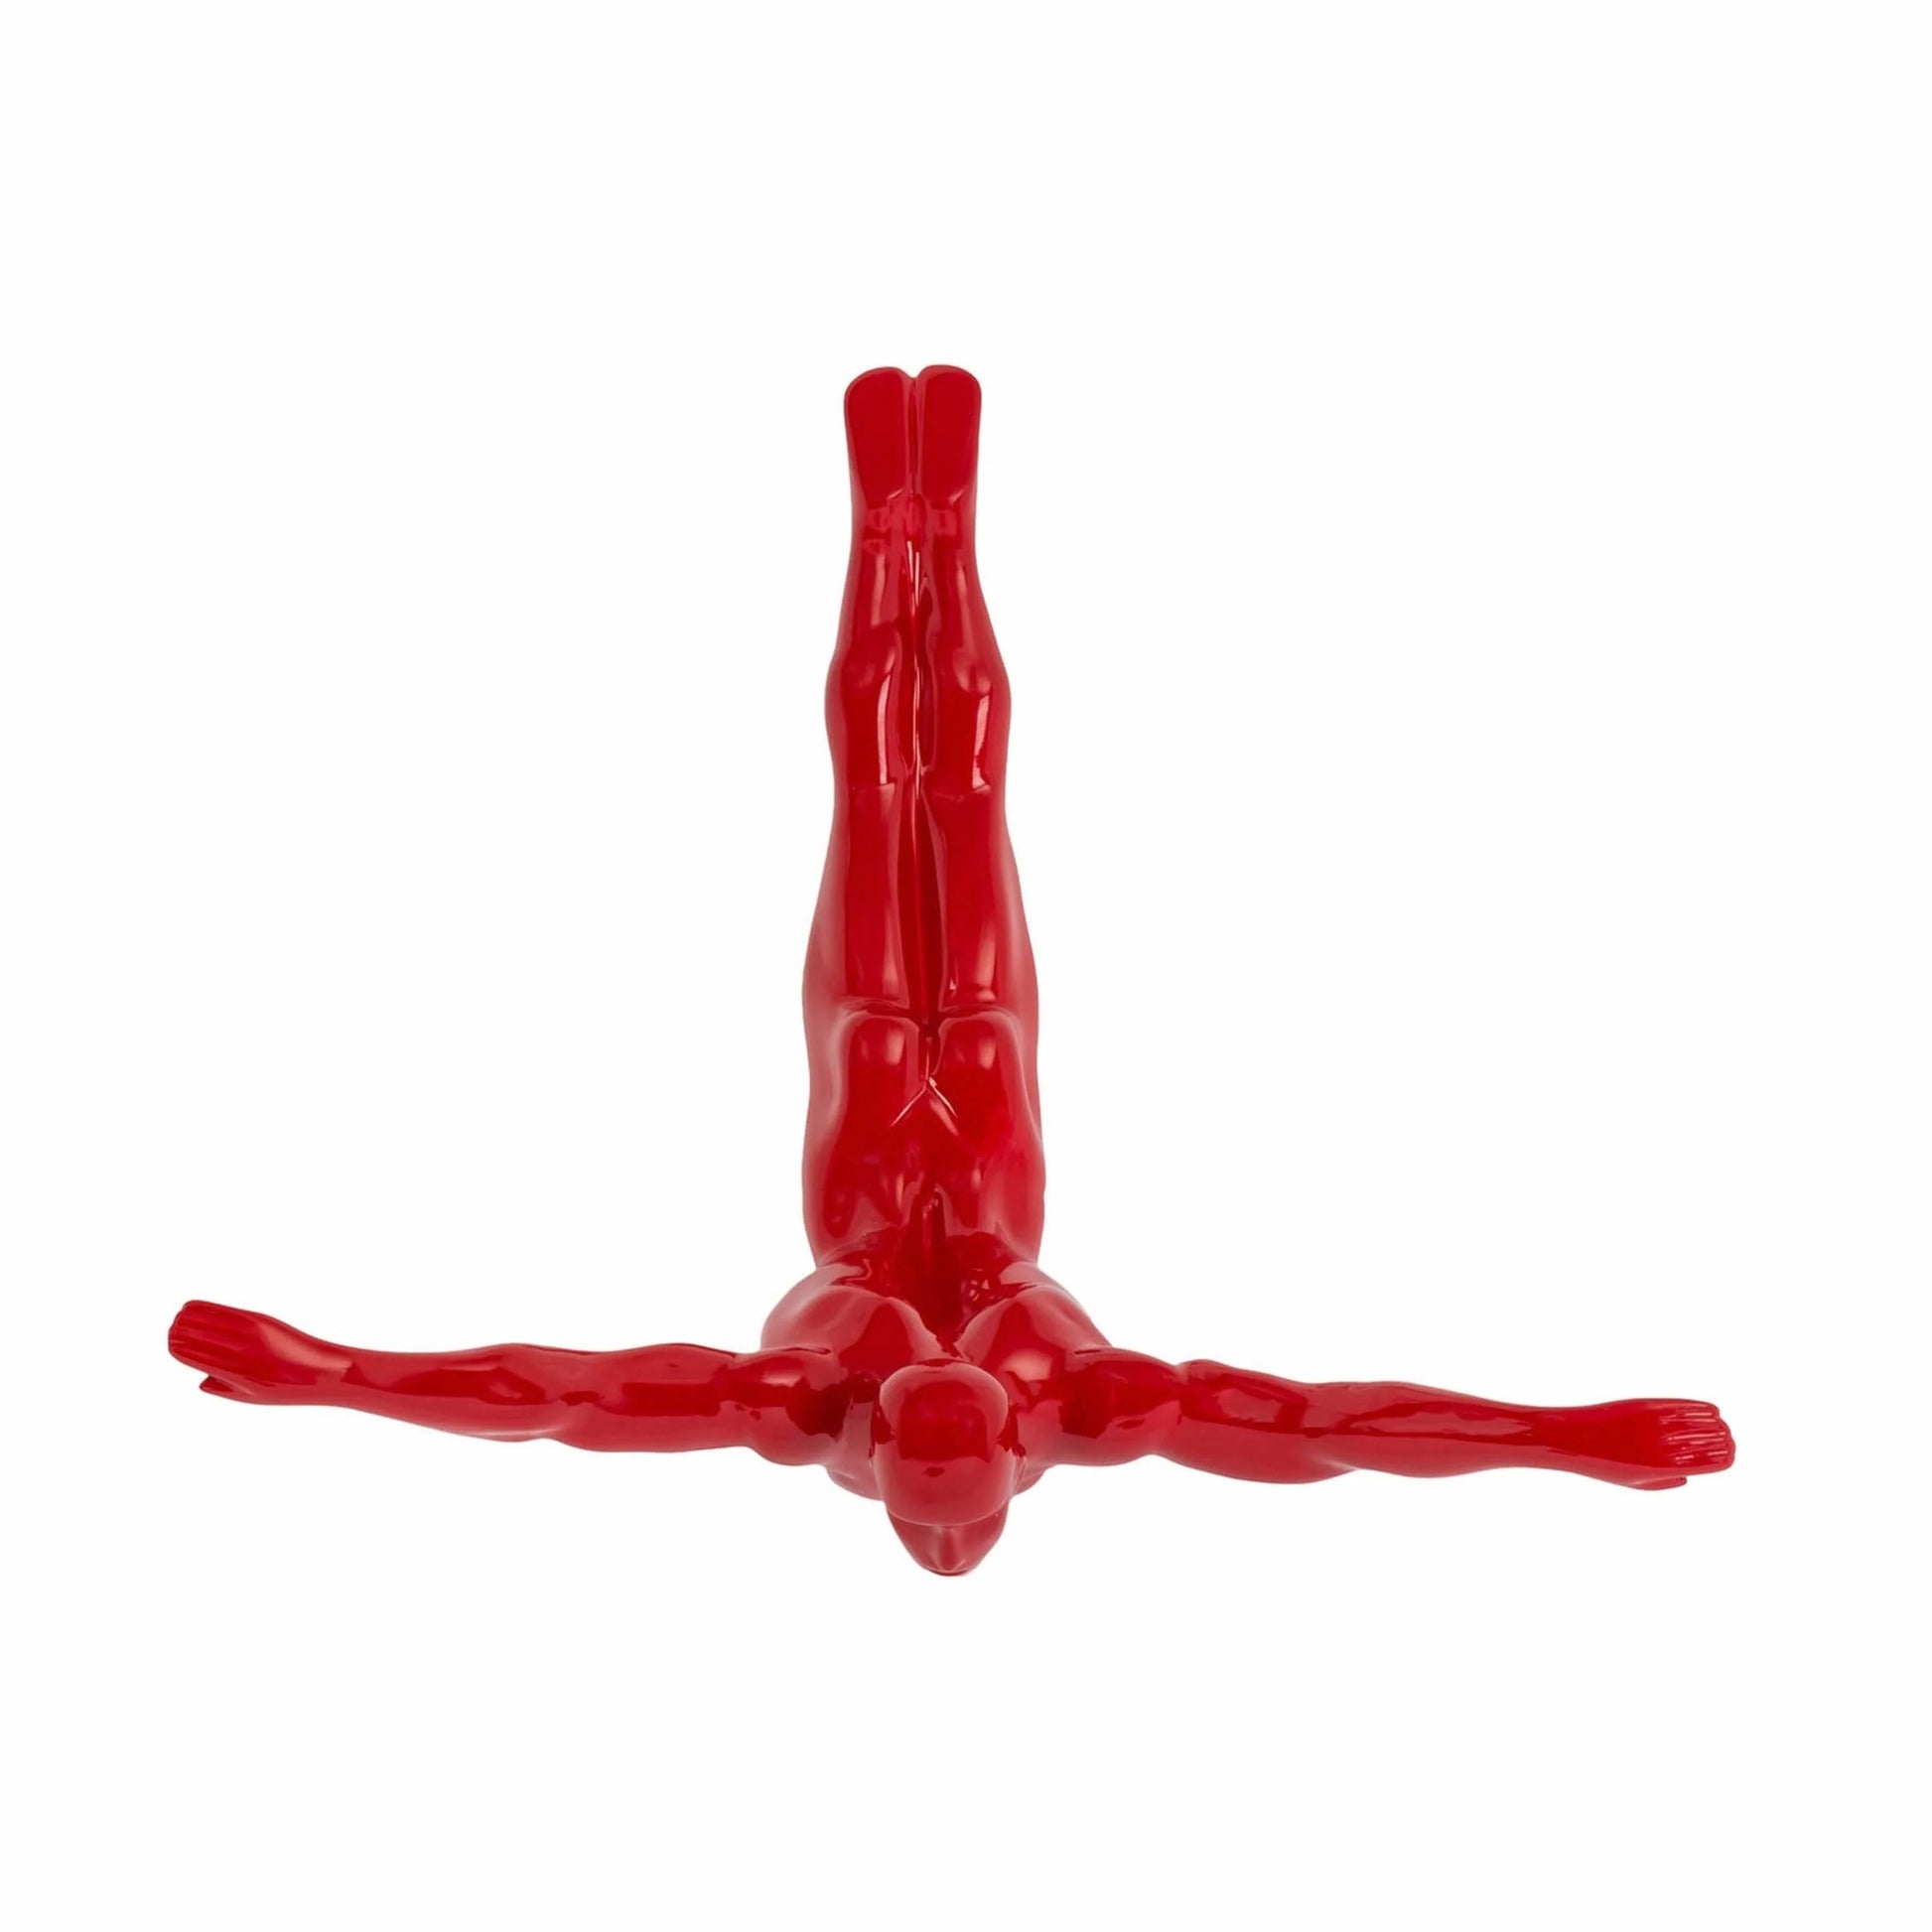 Finesse Decor Diver Wall Sculpture 22" Red 1